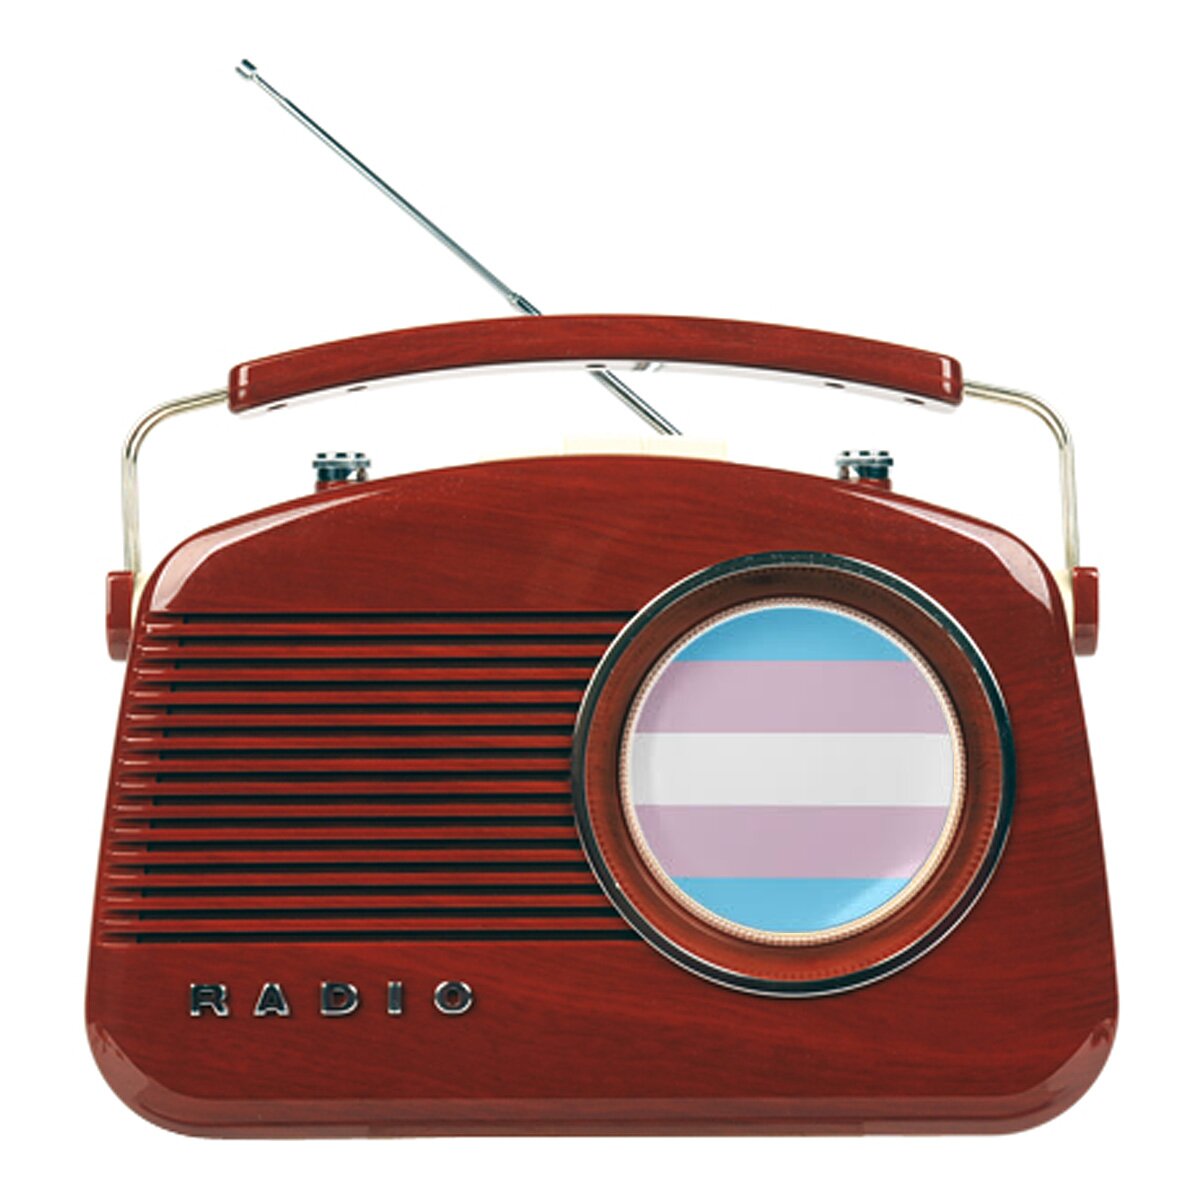 Time 4 T is Brighton & Hove's own Transgender radio show hosted by @ItsClaireParker on @radioreverb 97.2FM - Europe's only dedicated Transgender FM radio show